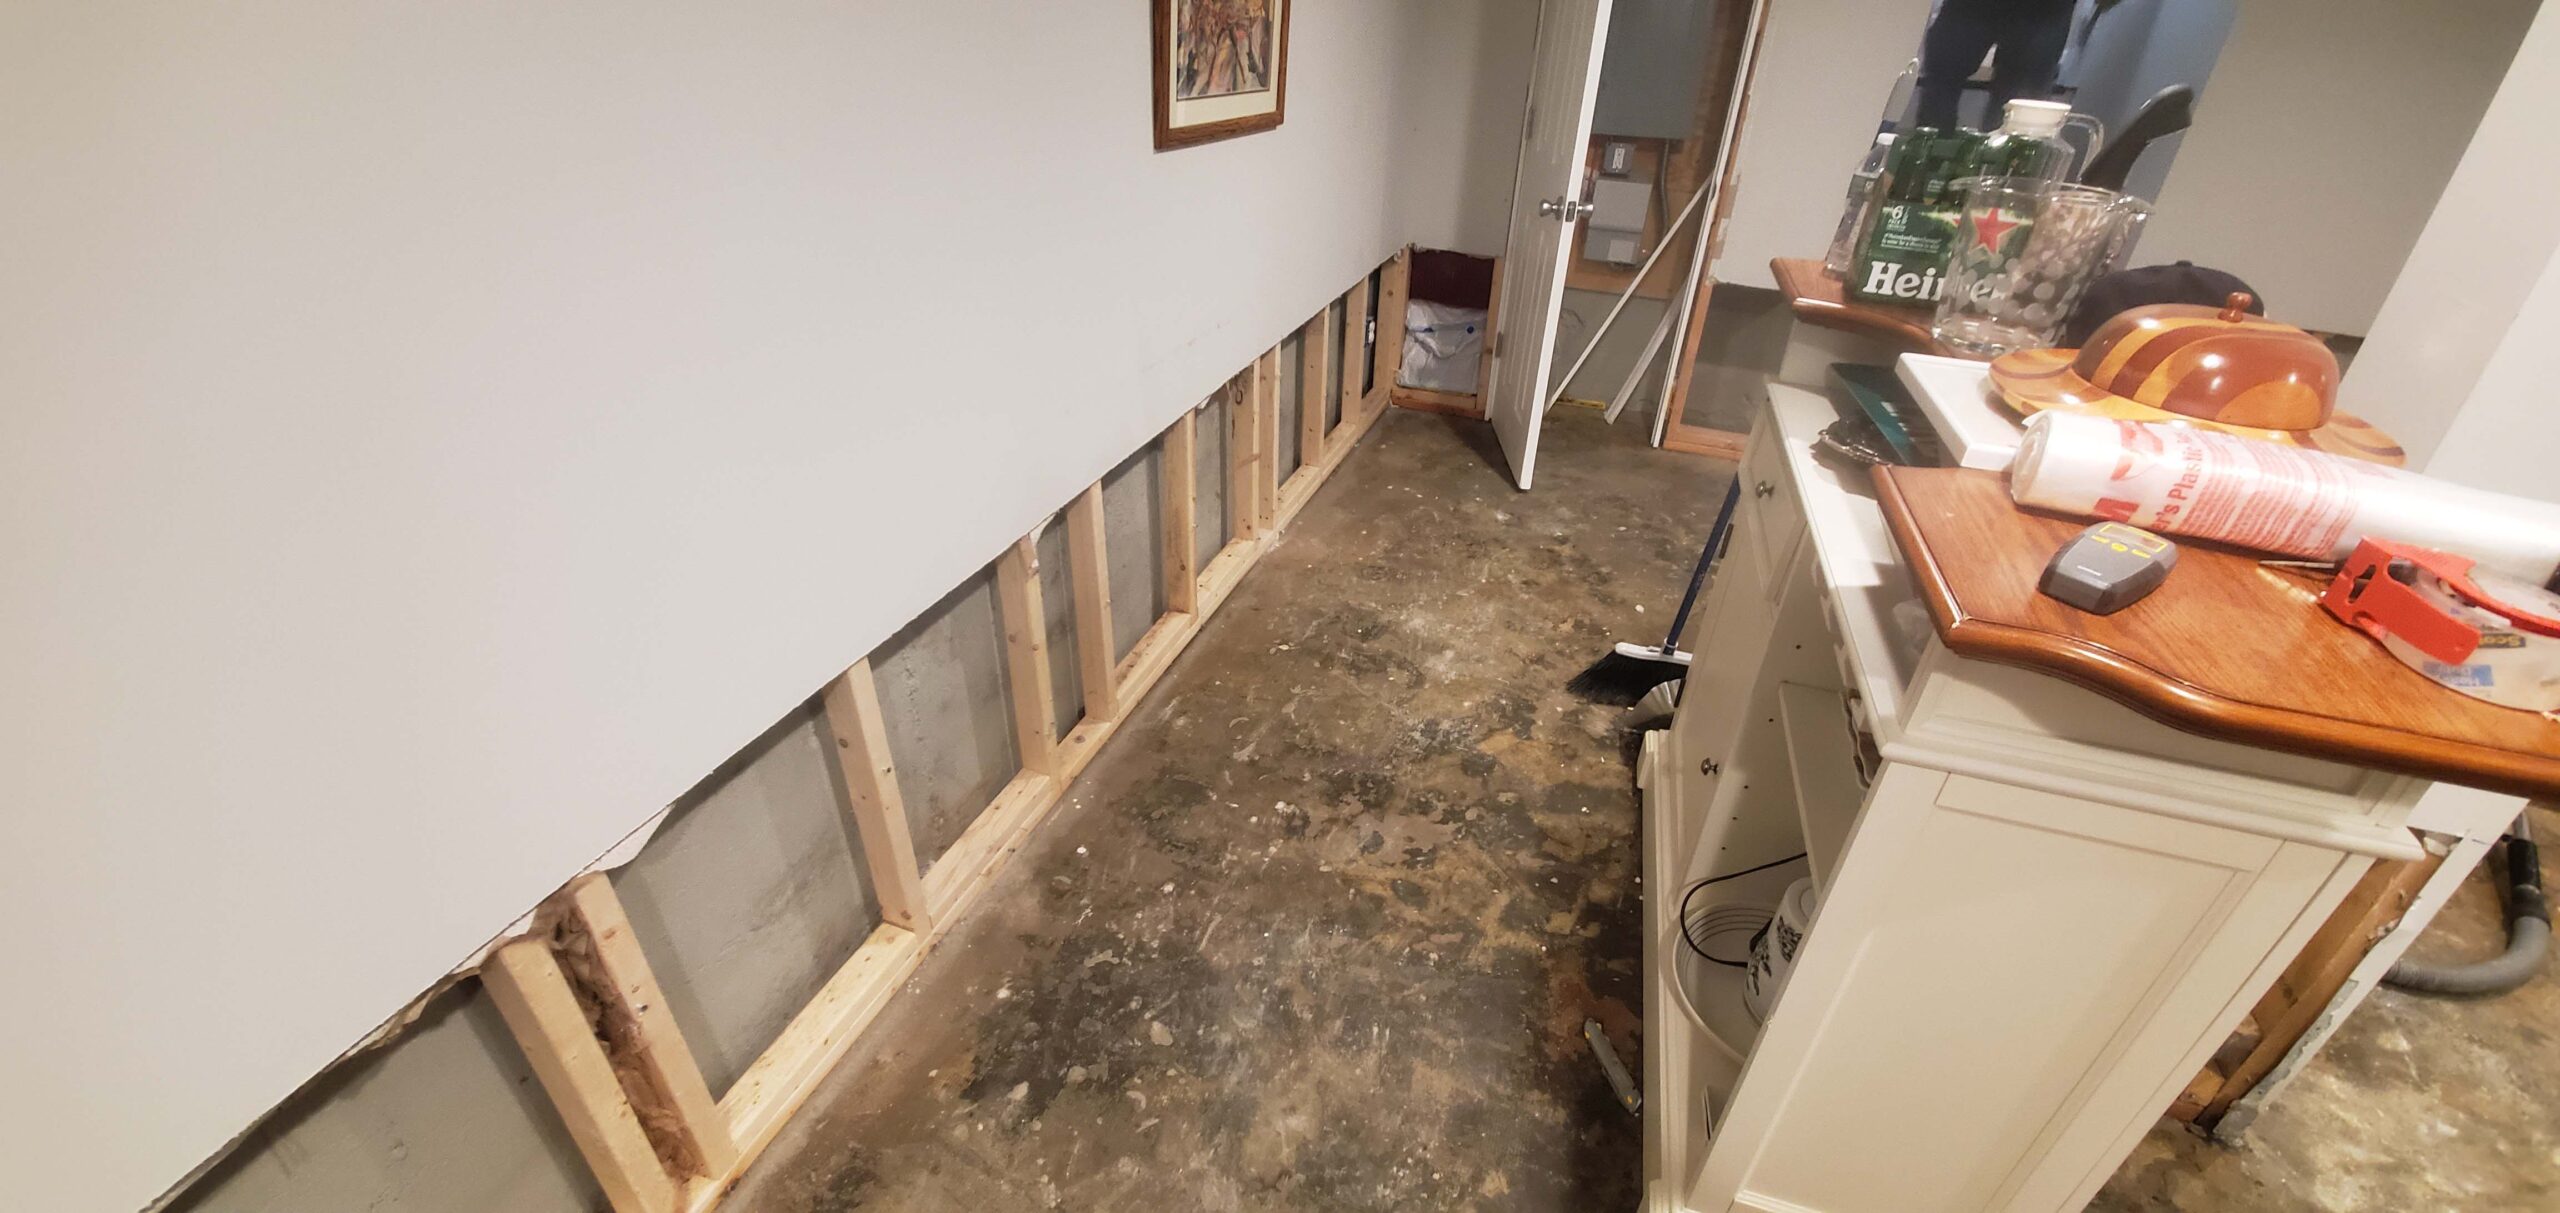 water damage restoration companies near me in plainview, ny 11803